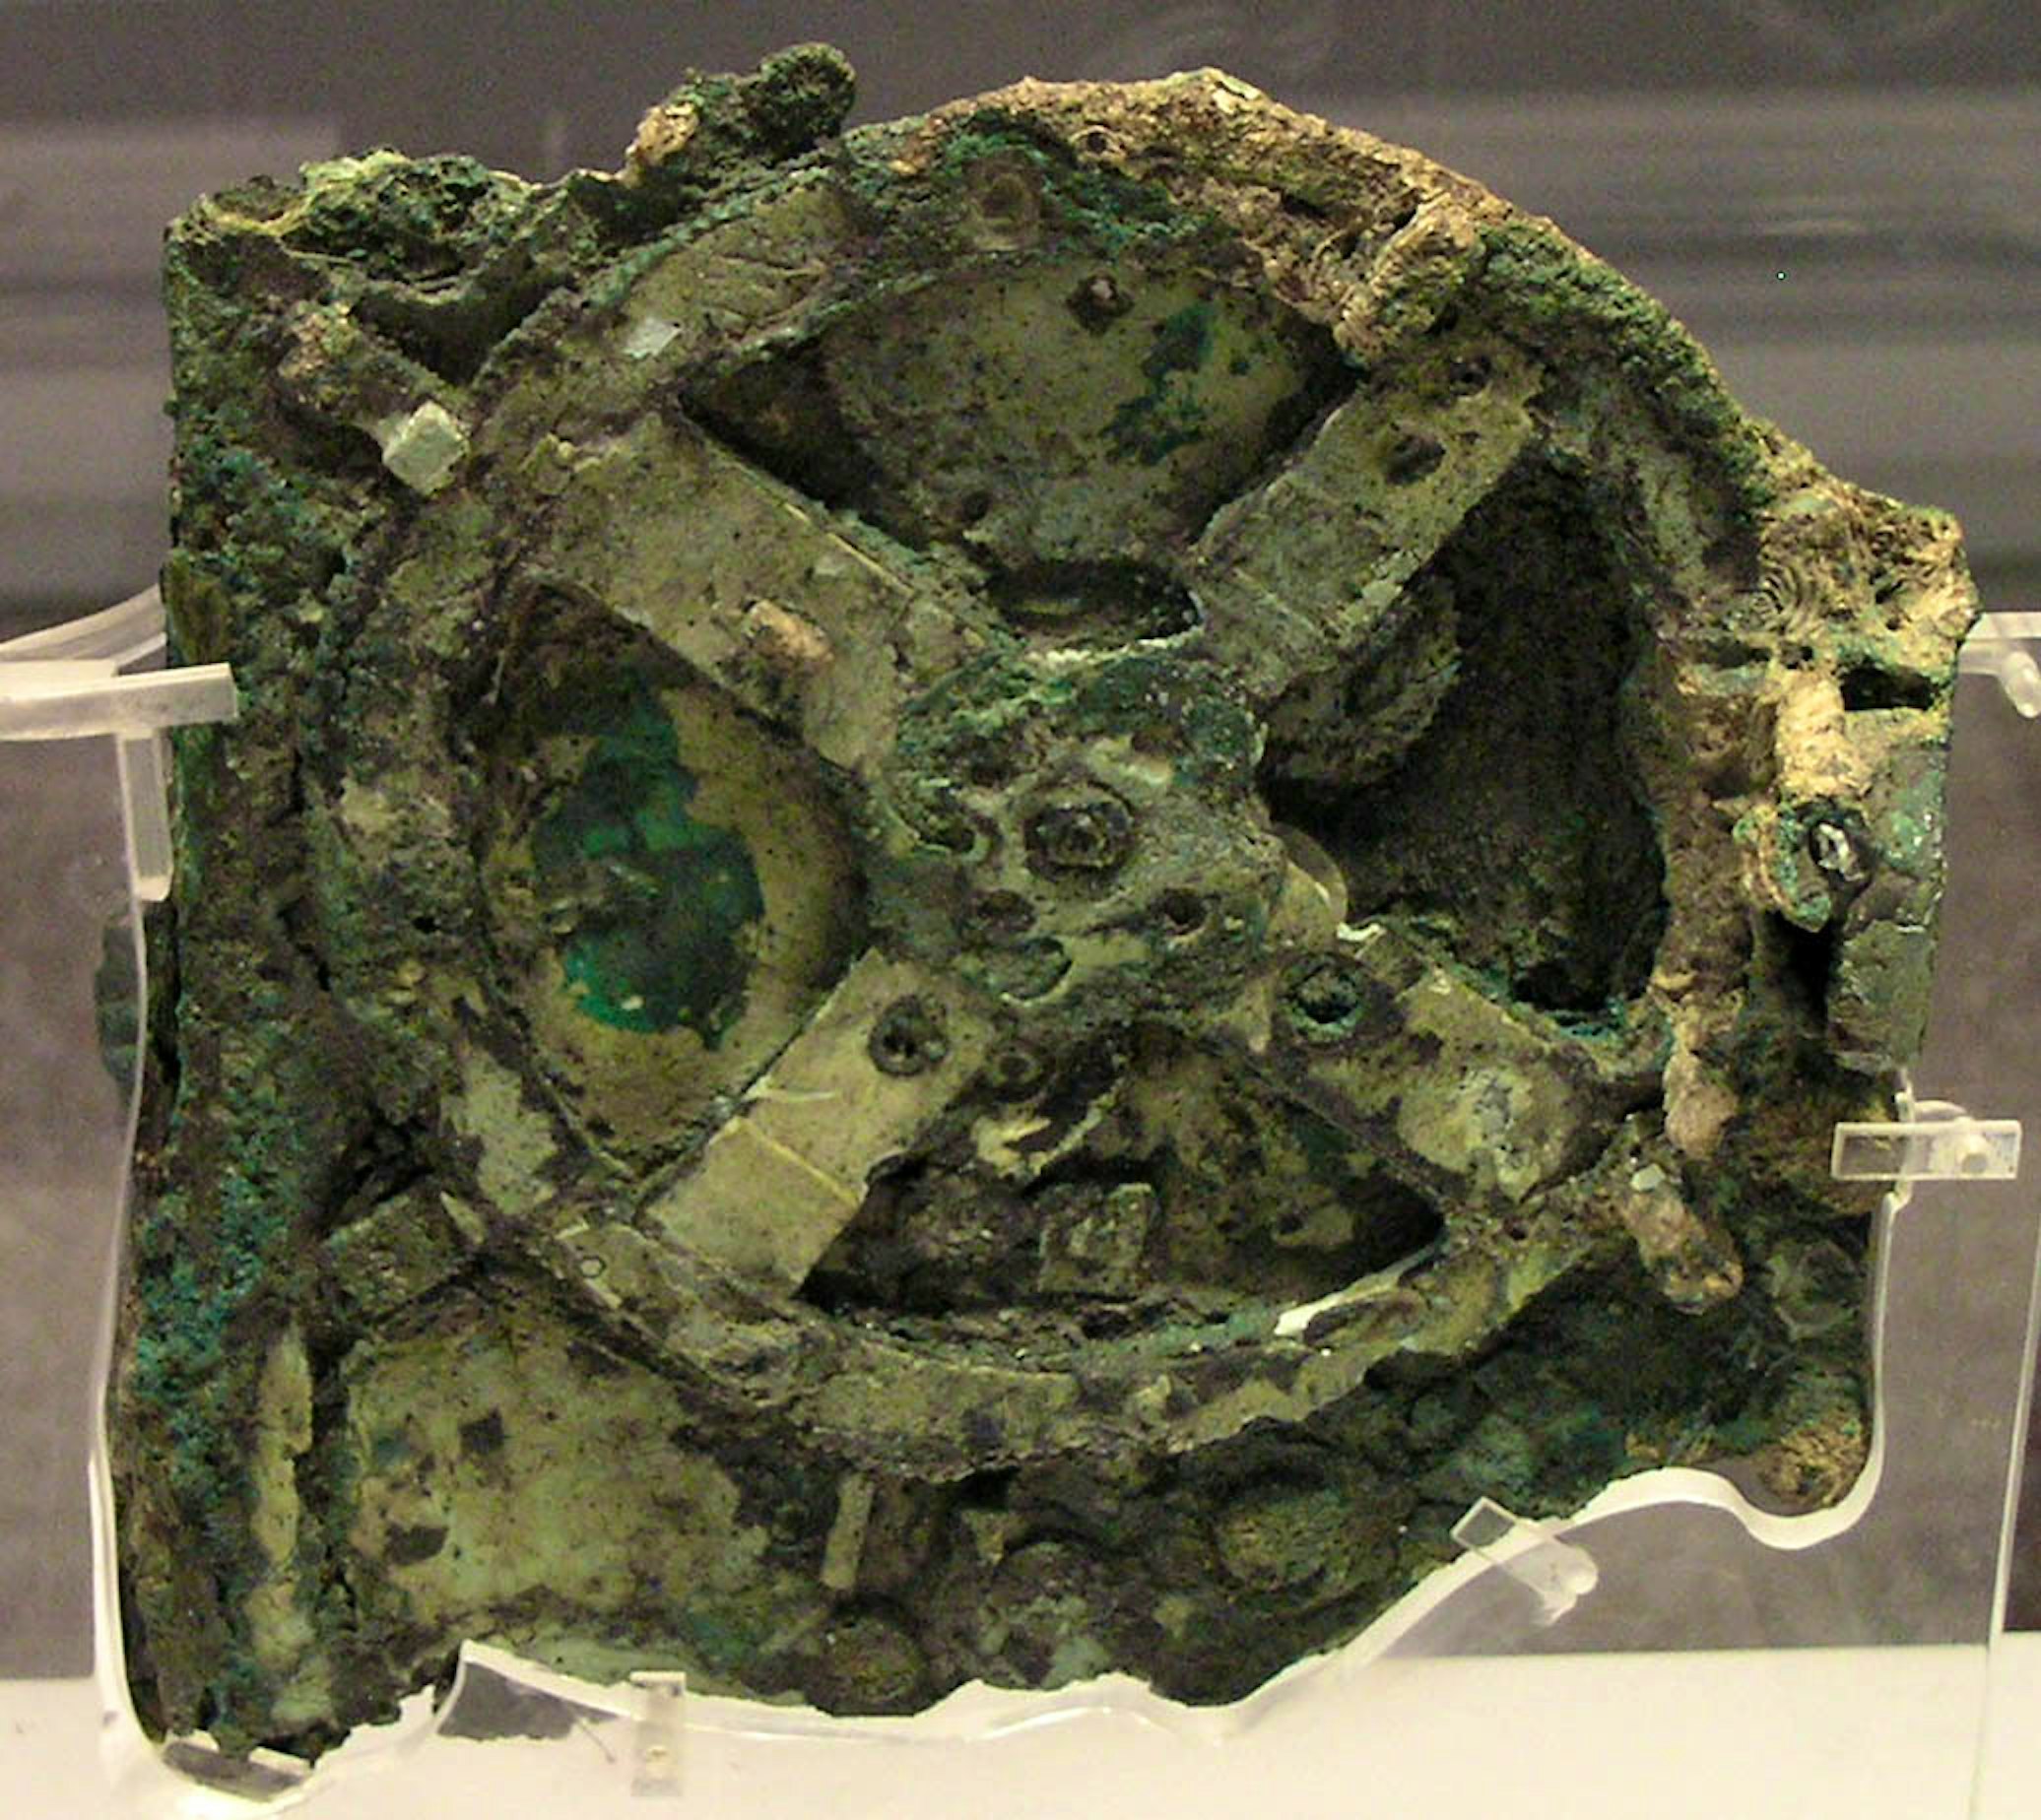 The Antikythera mechanism was discovered in 1901.